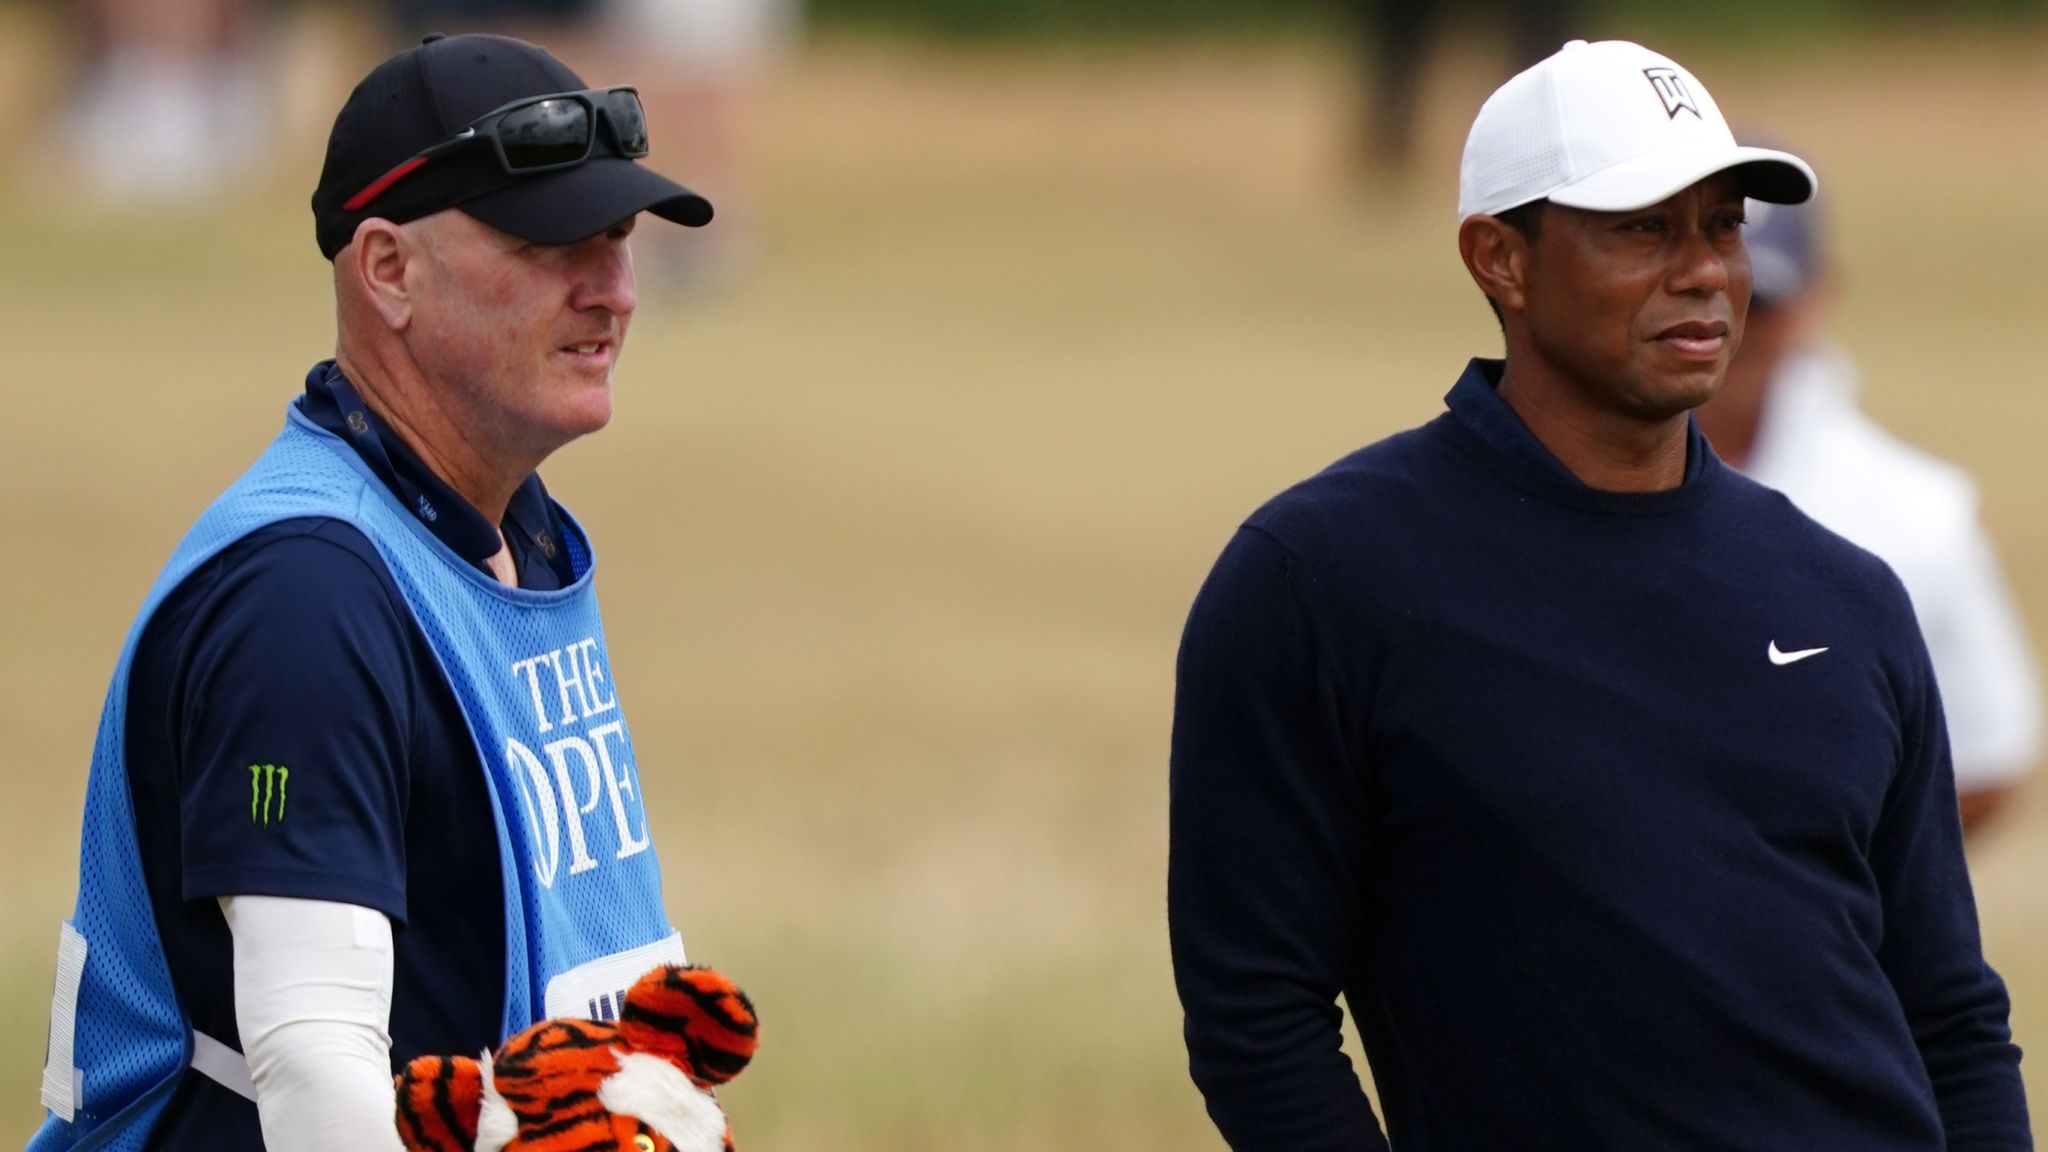 The 150th Open Tiger Woods denies retirement rumours ahead of major return at St Andrews Golf News Sky Sports